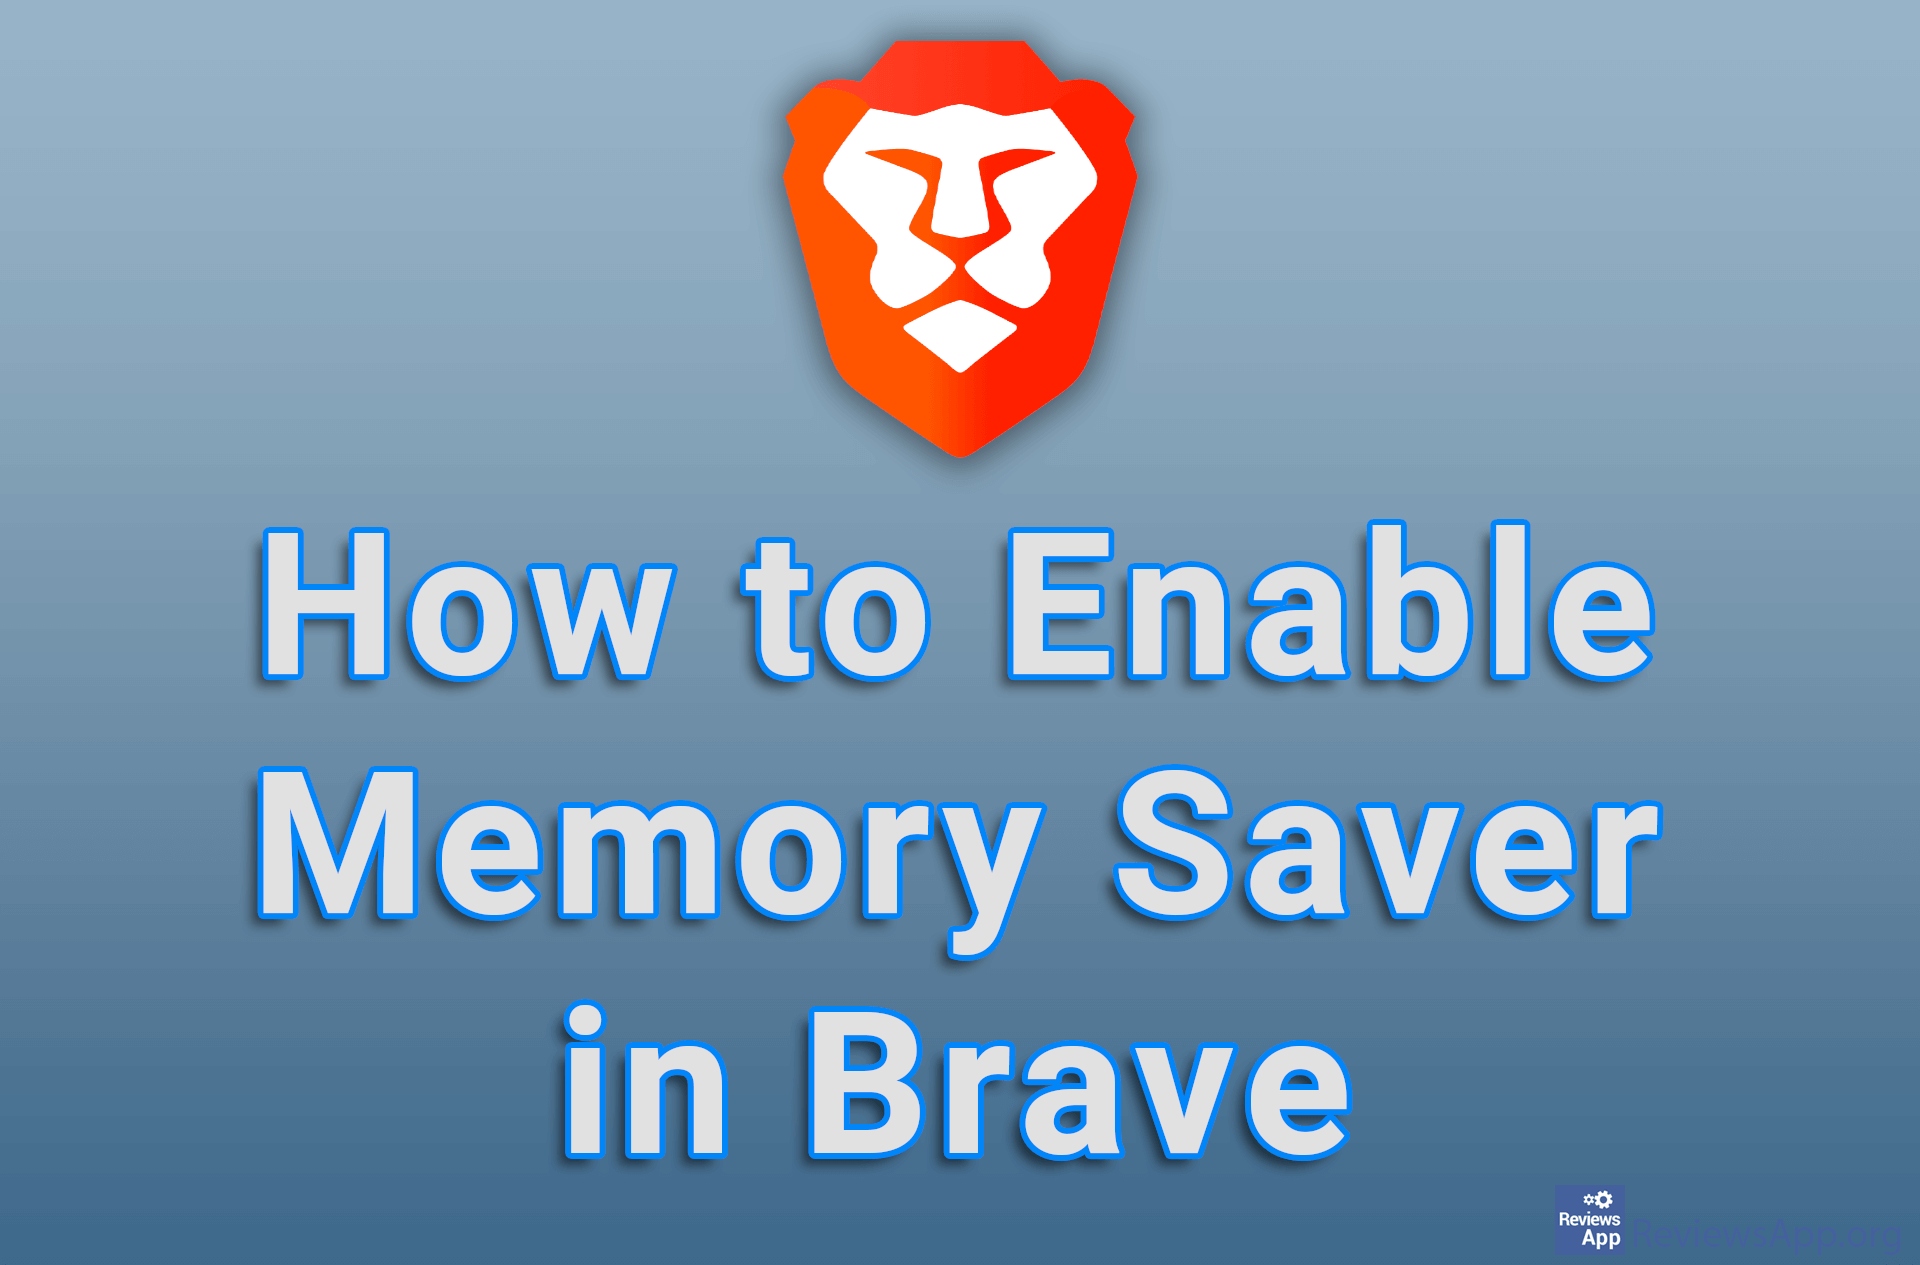 How to Enable Memory Saver in Brave